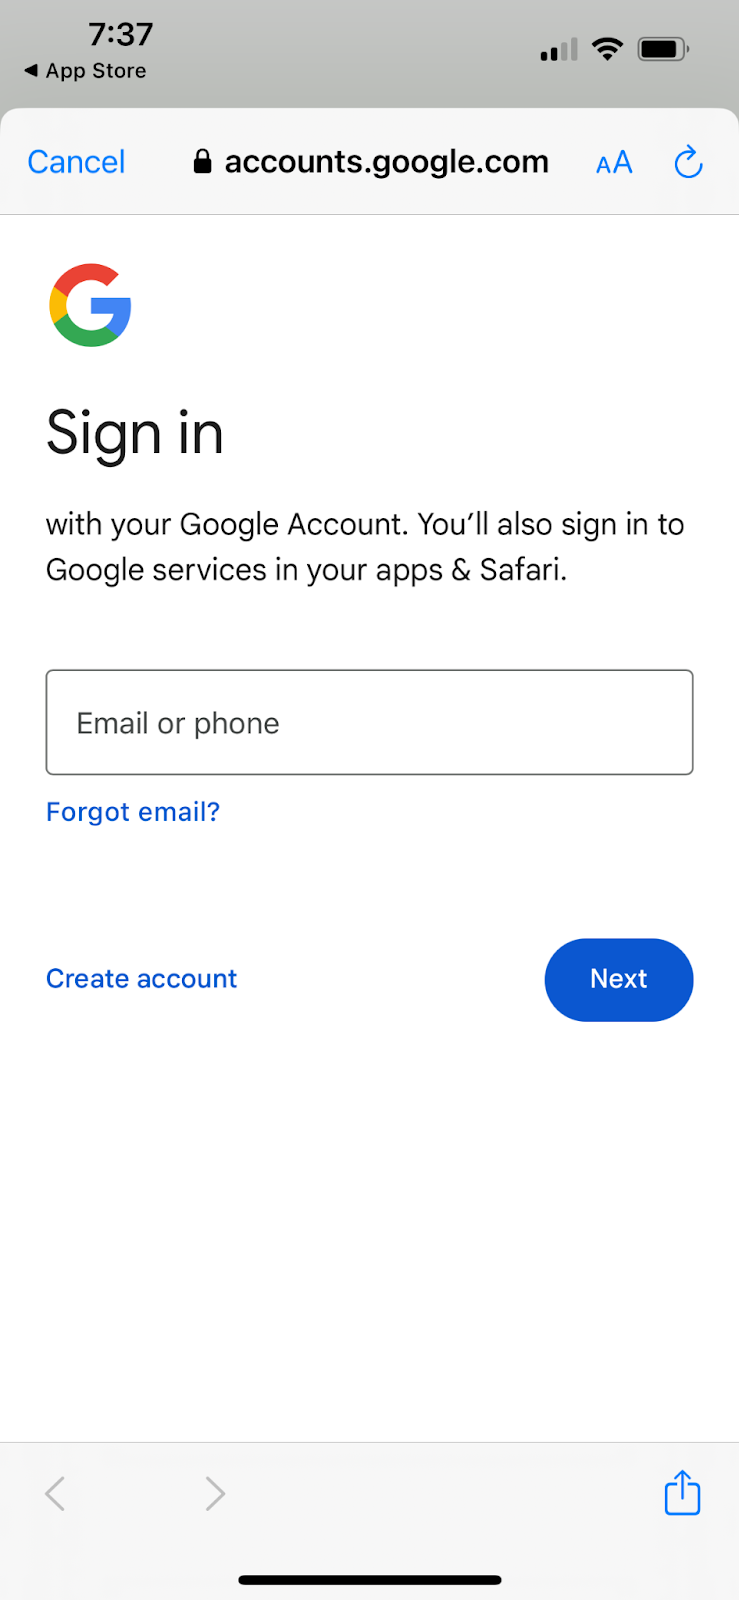 Sign in with Google Account screen